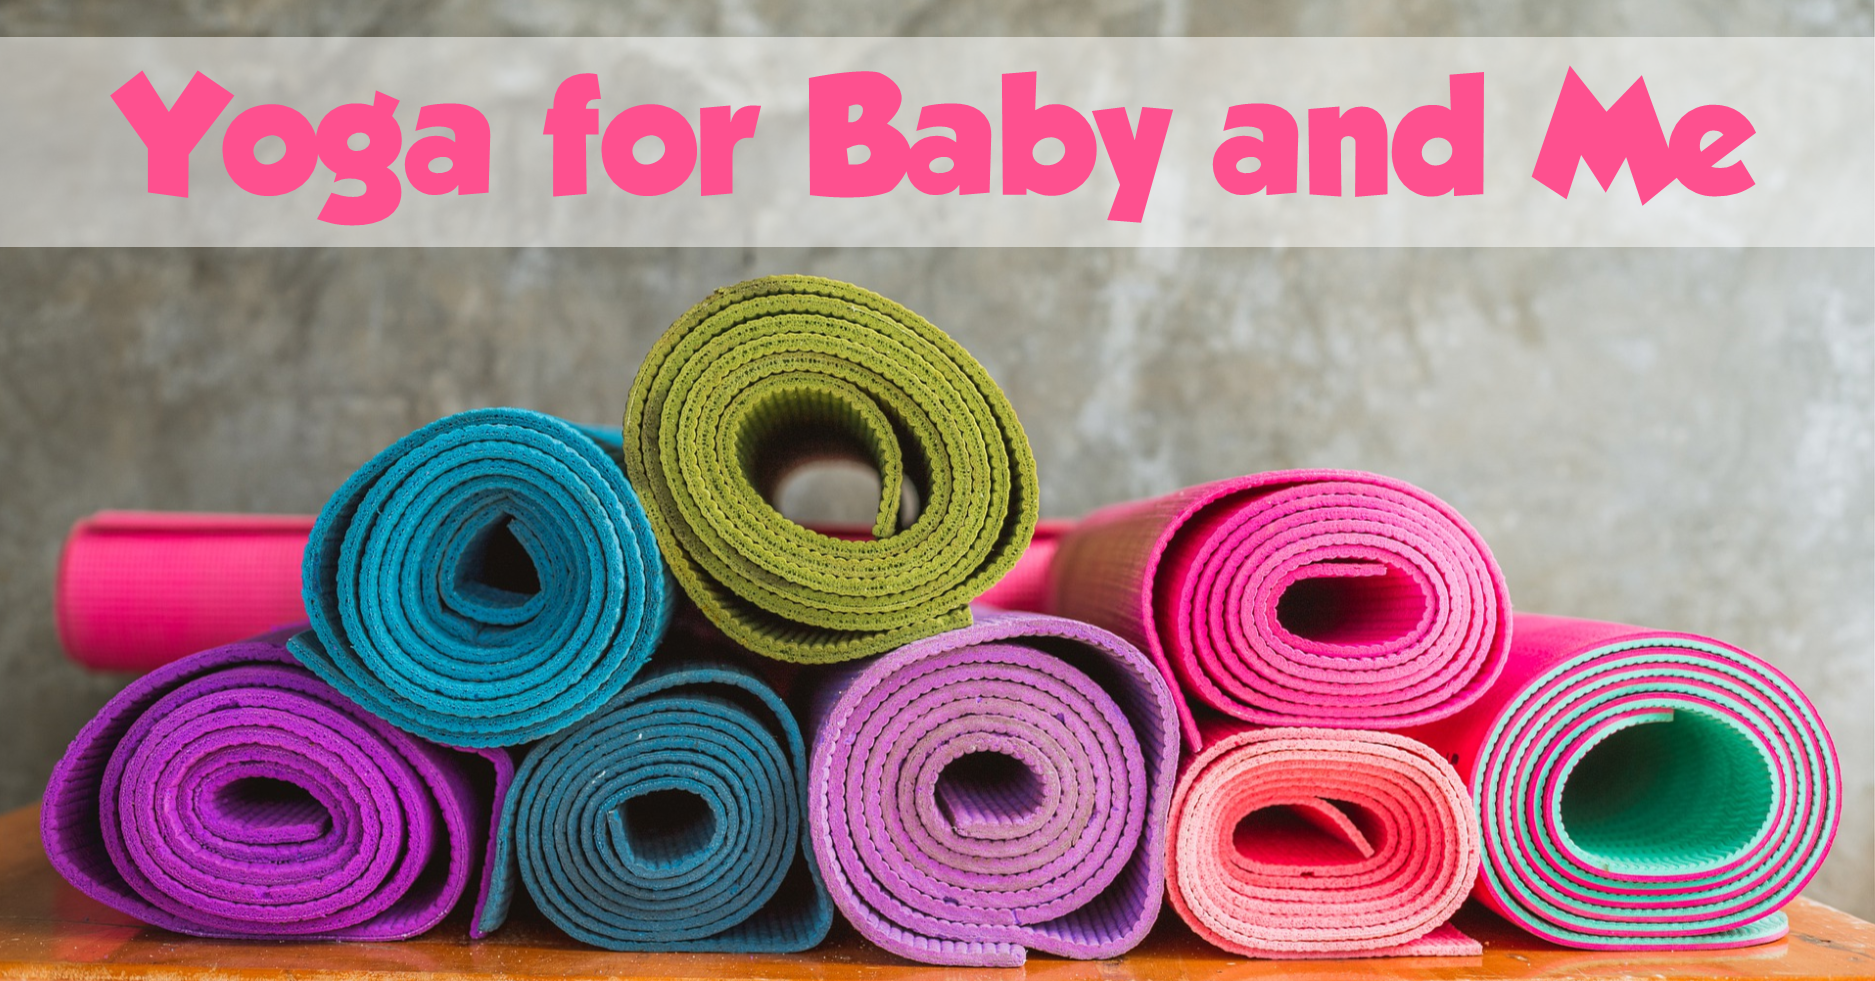 Colorful yoga mats and text that says "Yoga for baby and me"